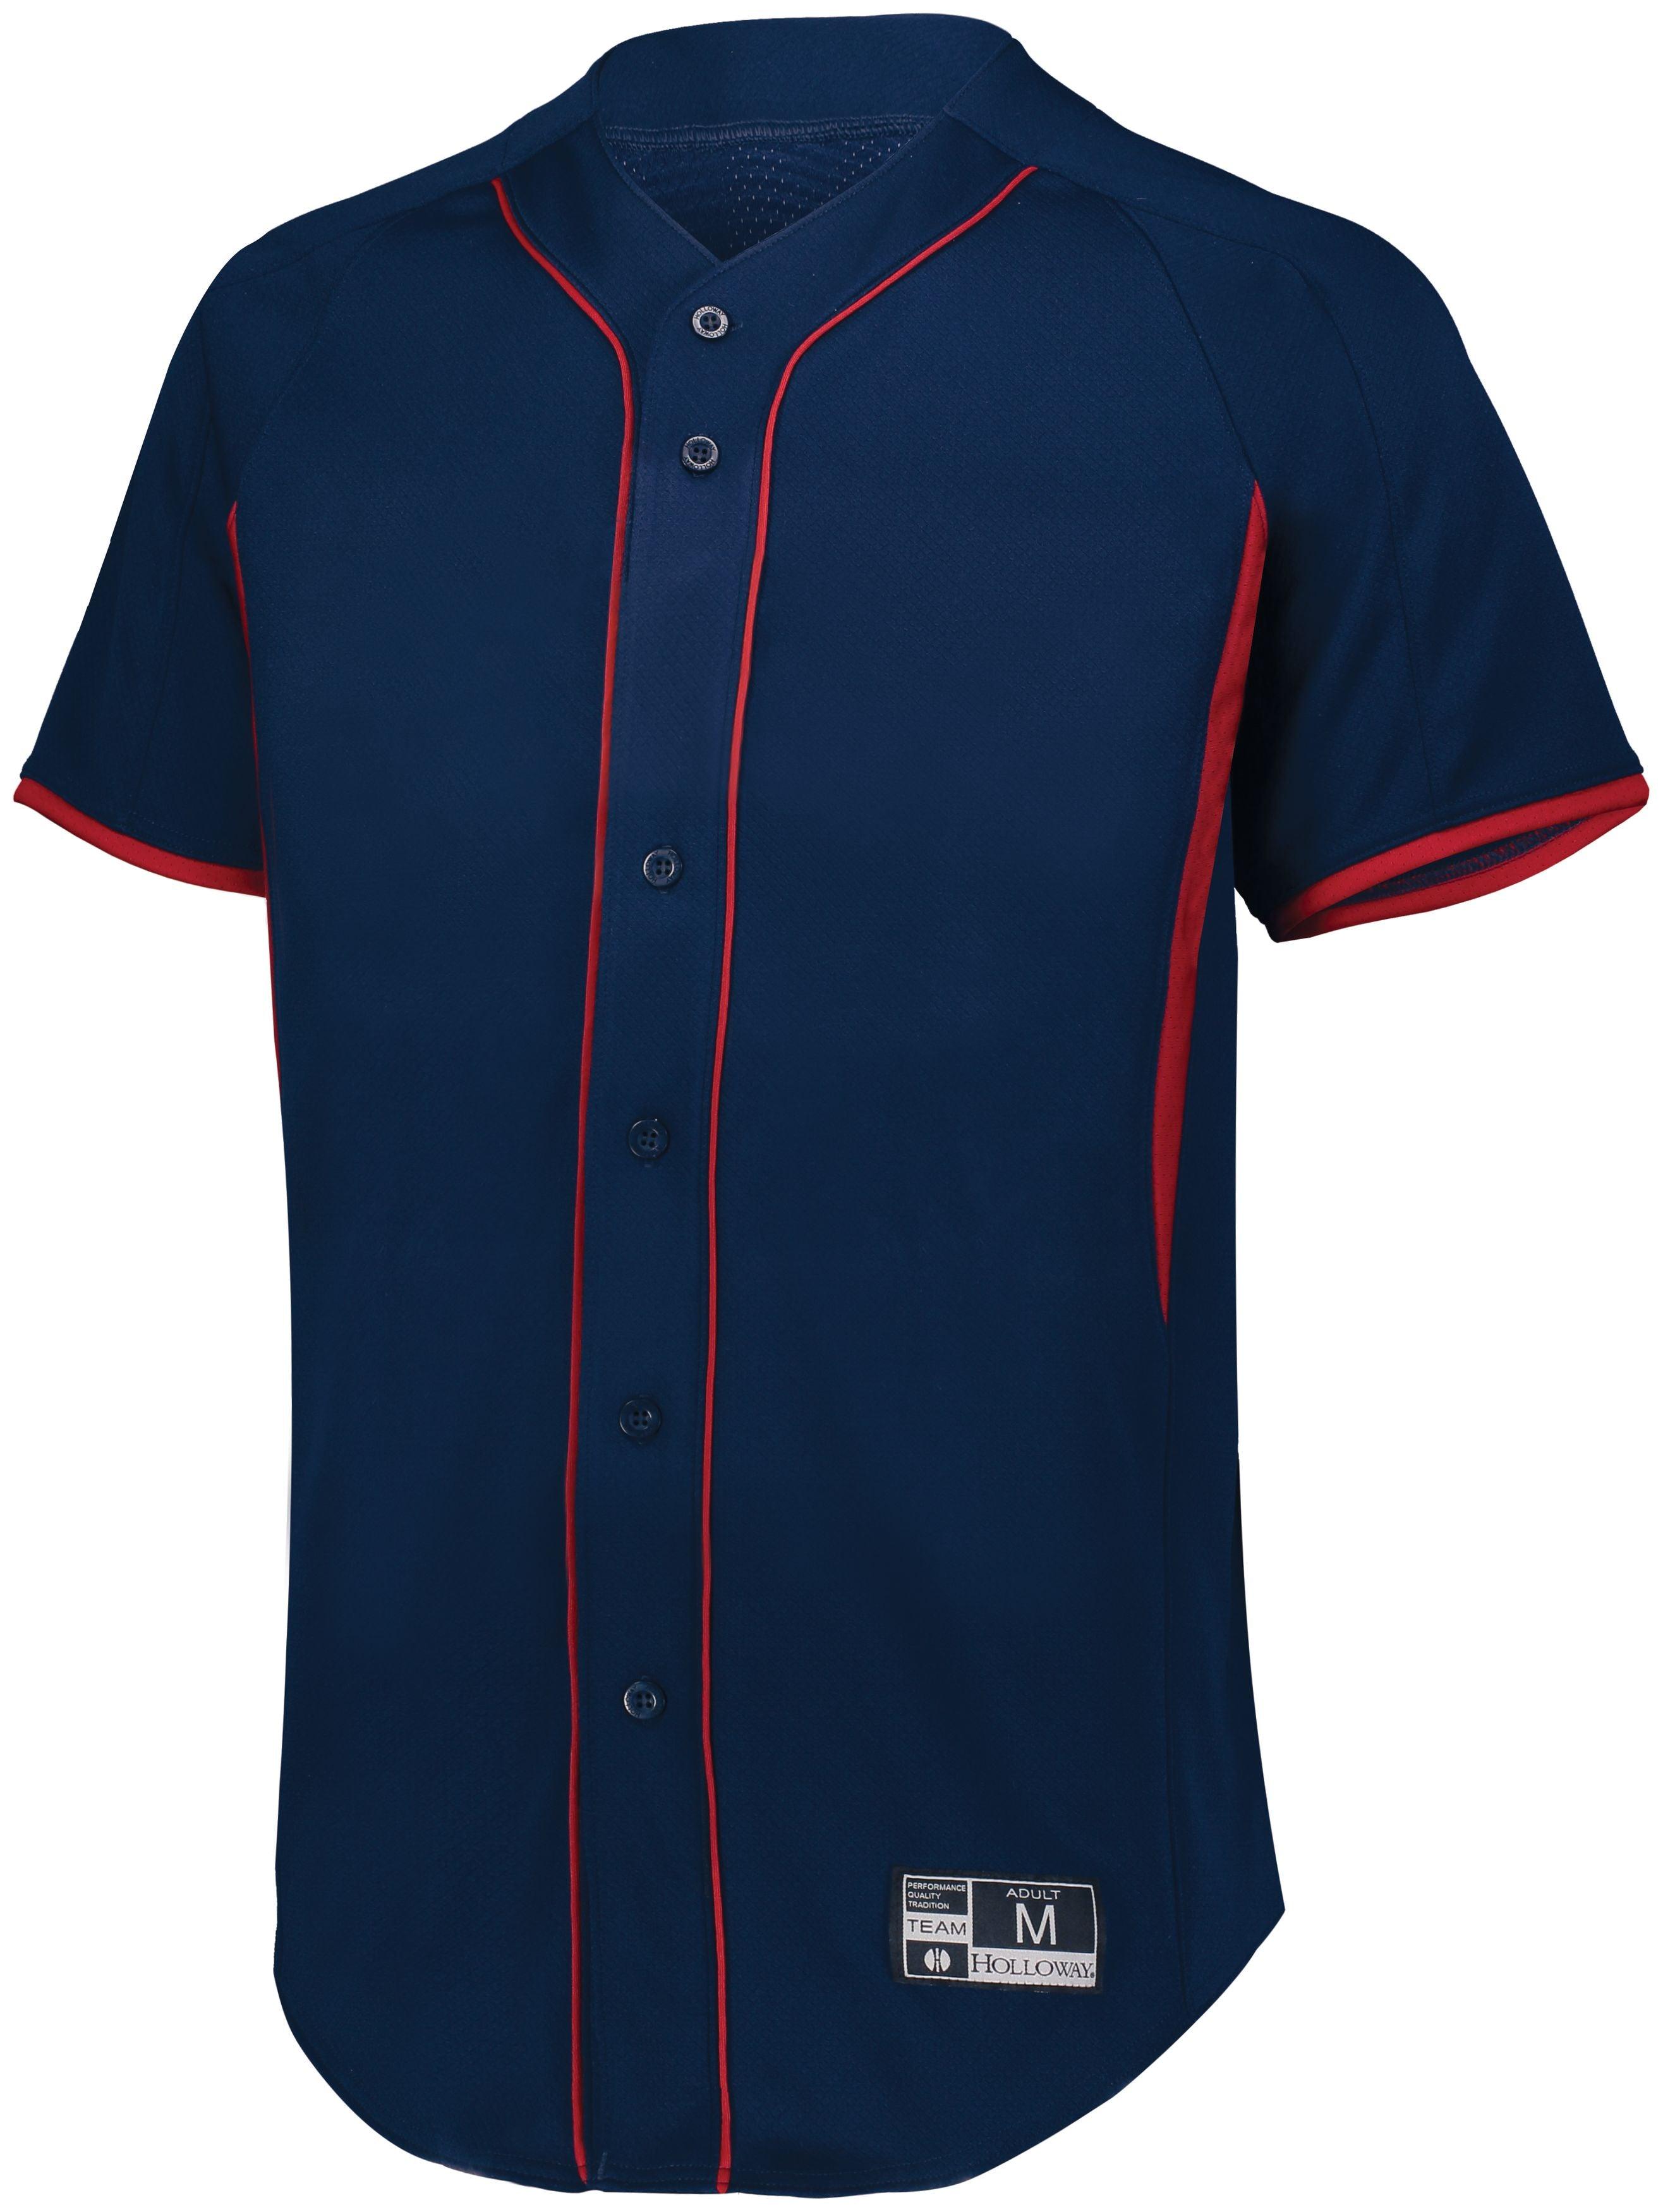 Game7 Full-Button Baseball Jersey - Dresses Max